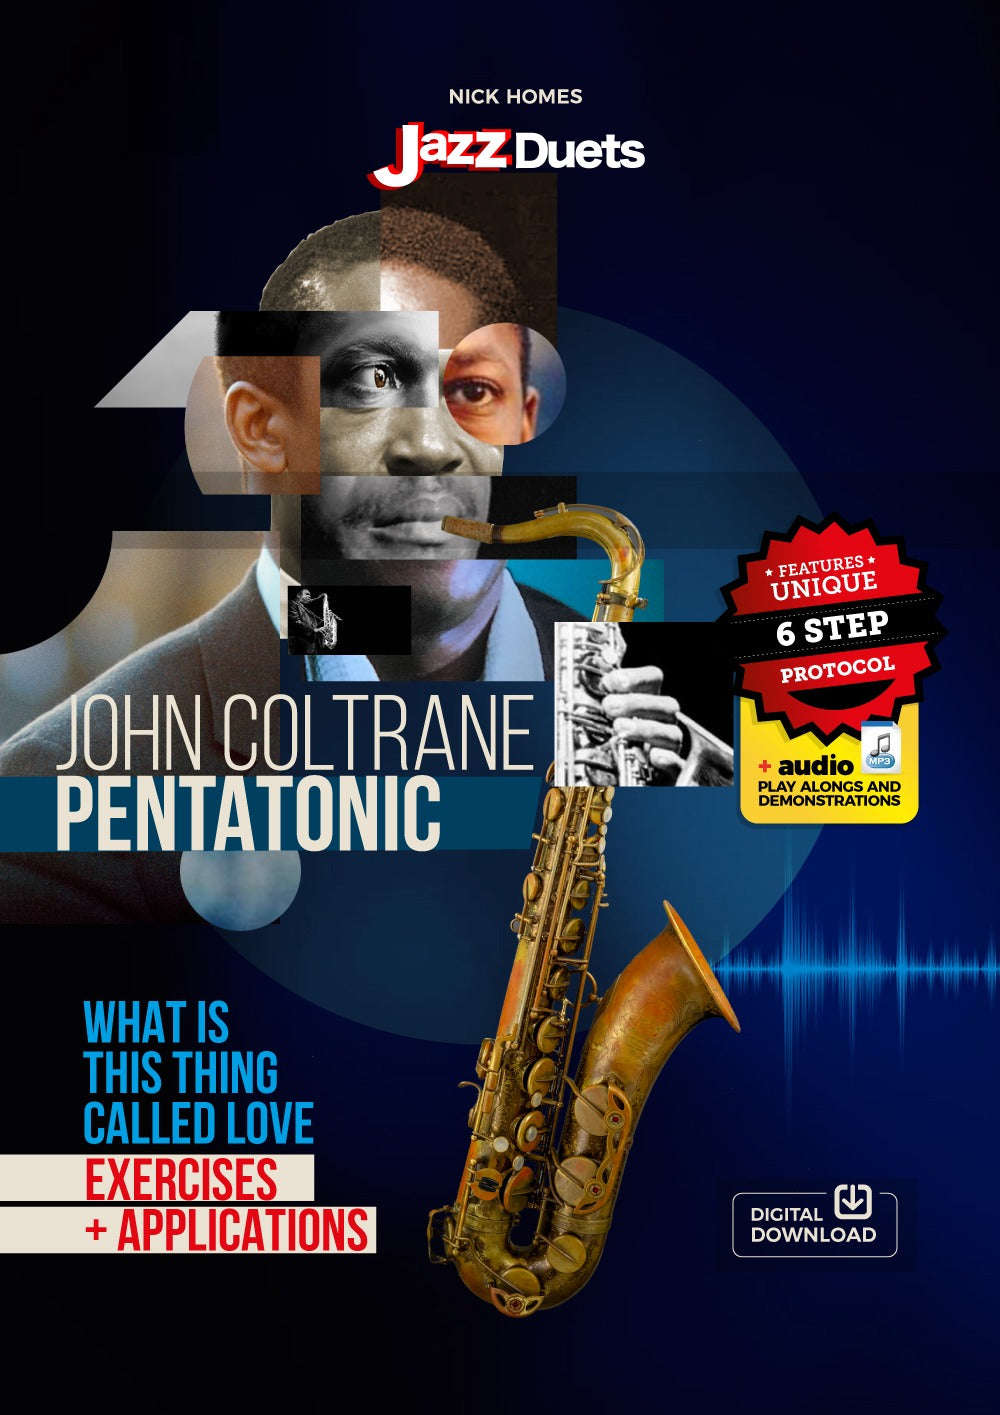 Coltrane Pentatonic "What is this thing called love" exercises